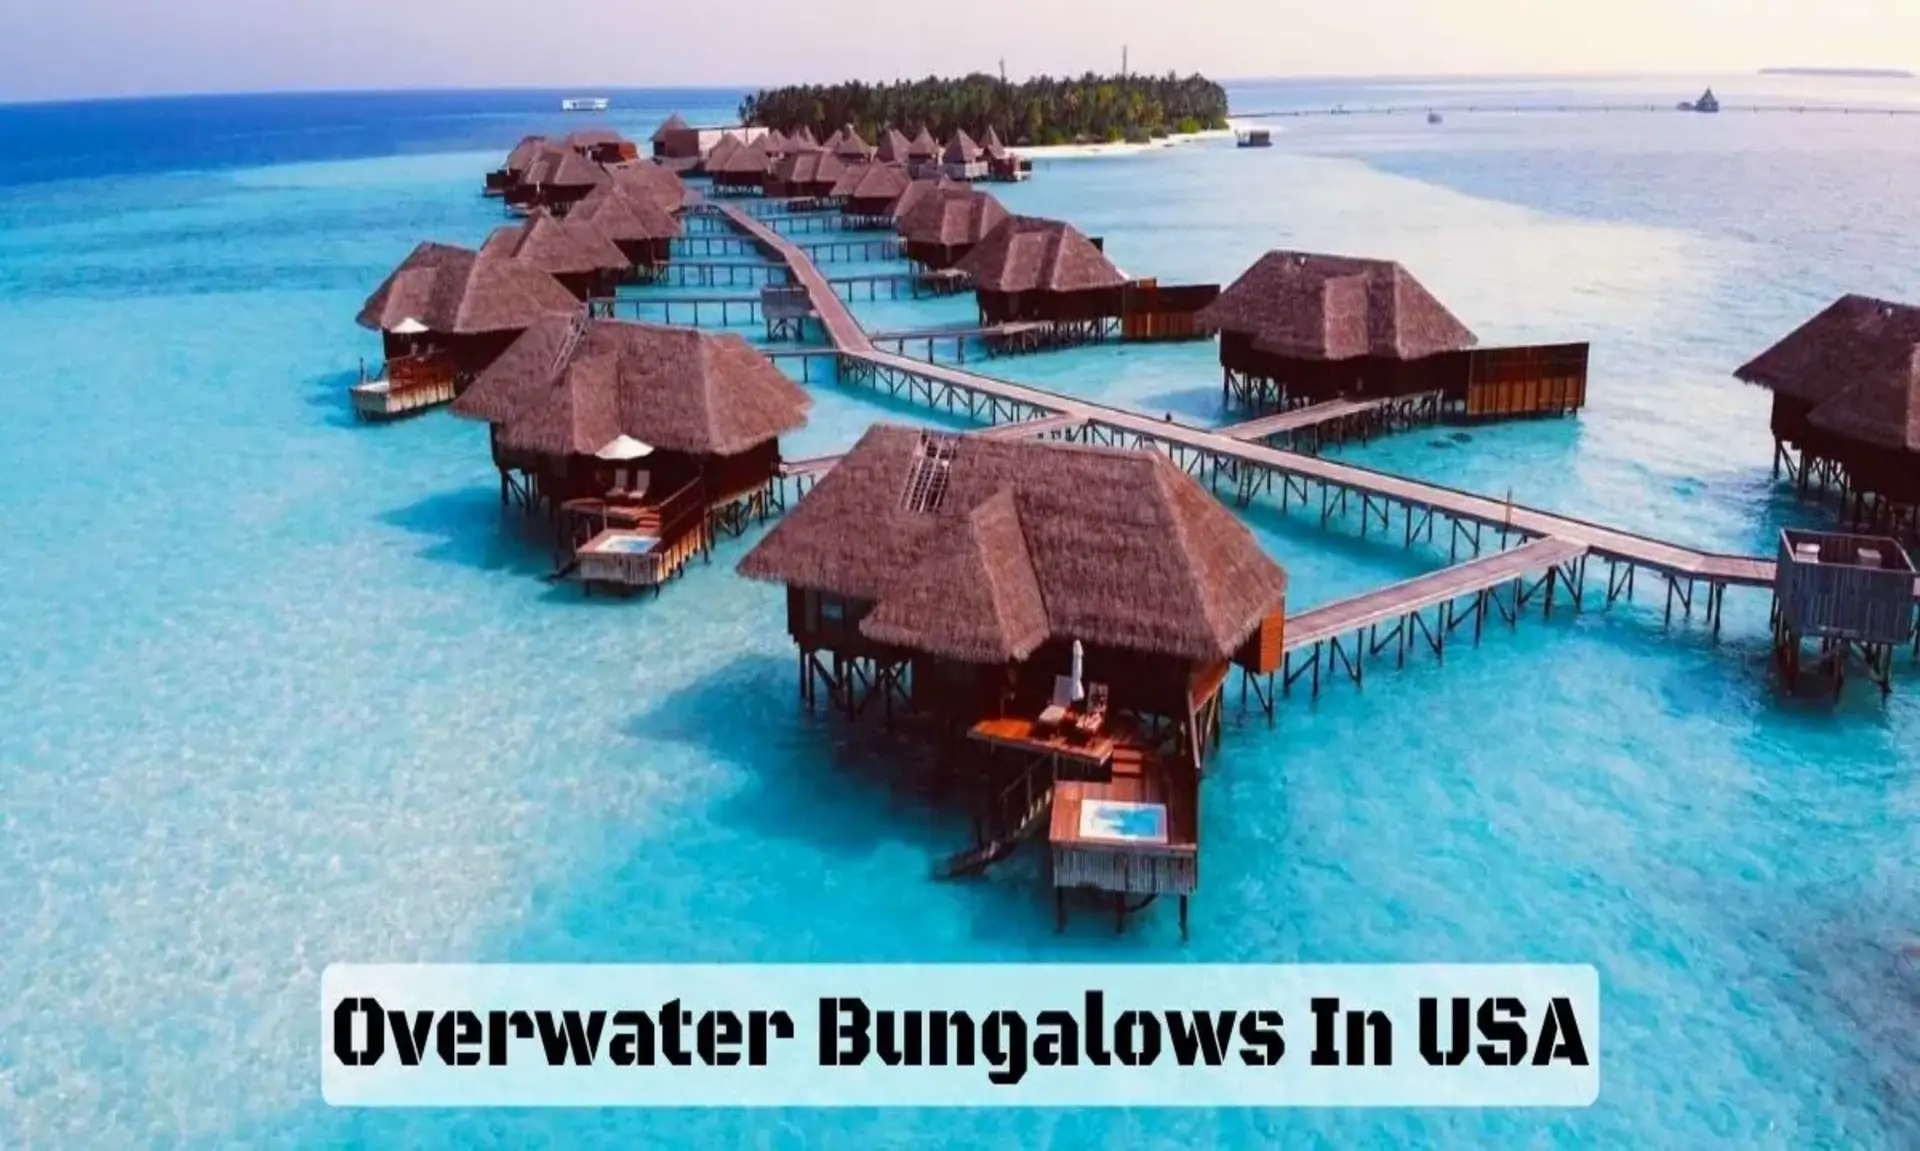 10 Stunning Overwater Bungalows In USA